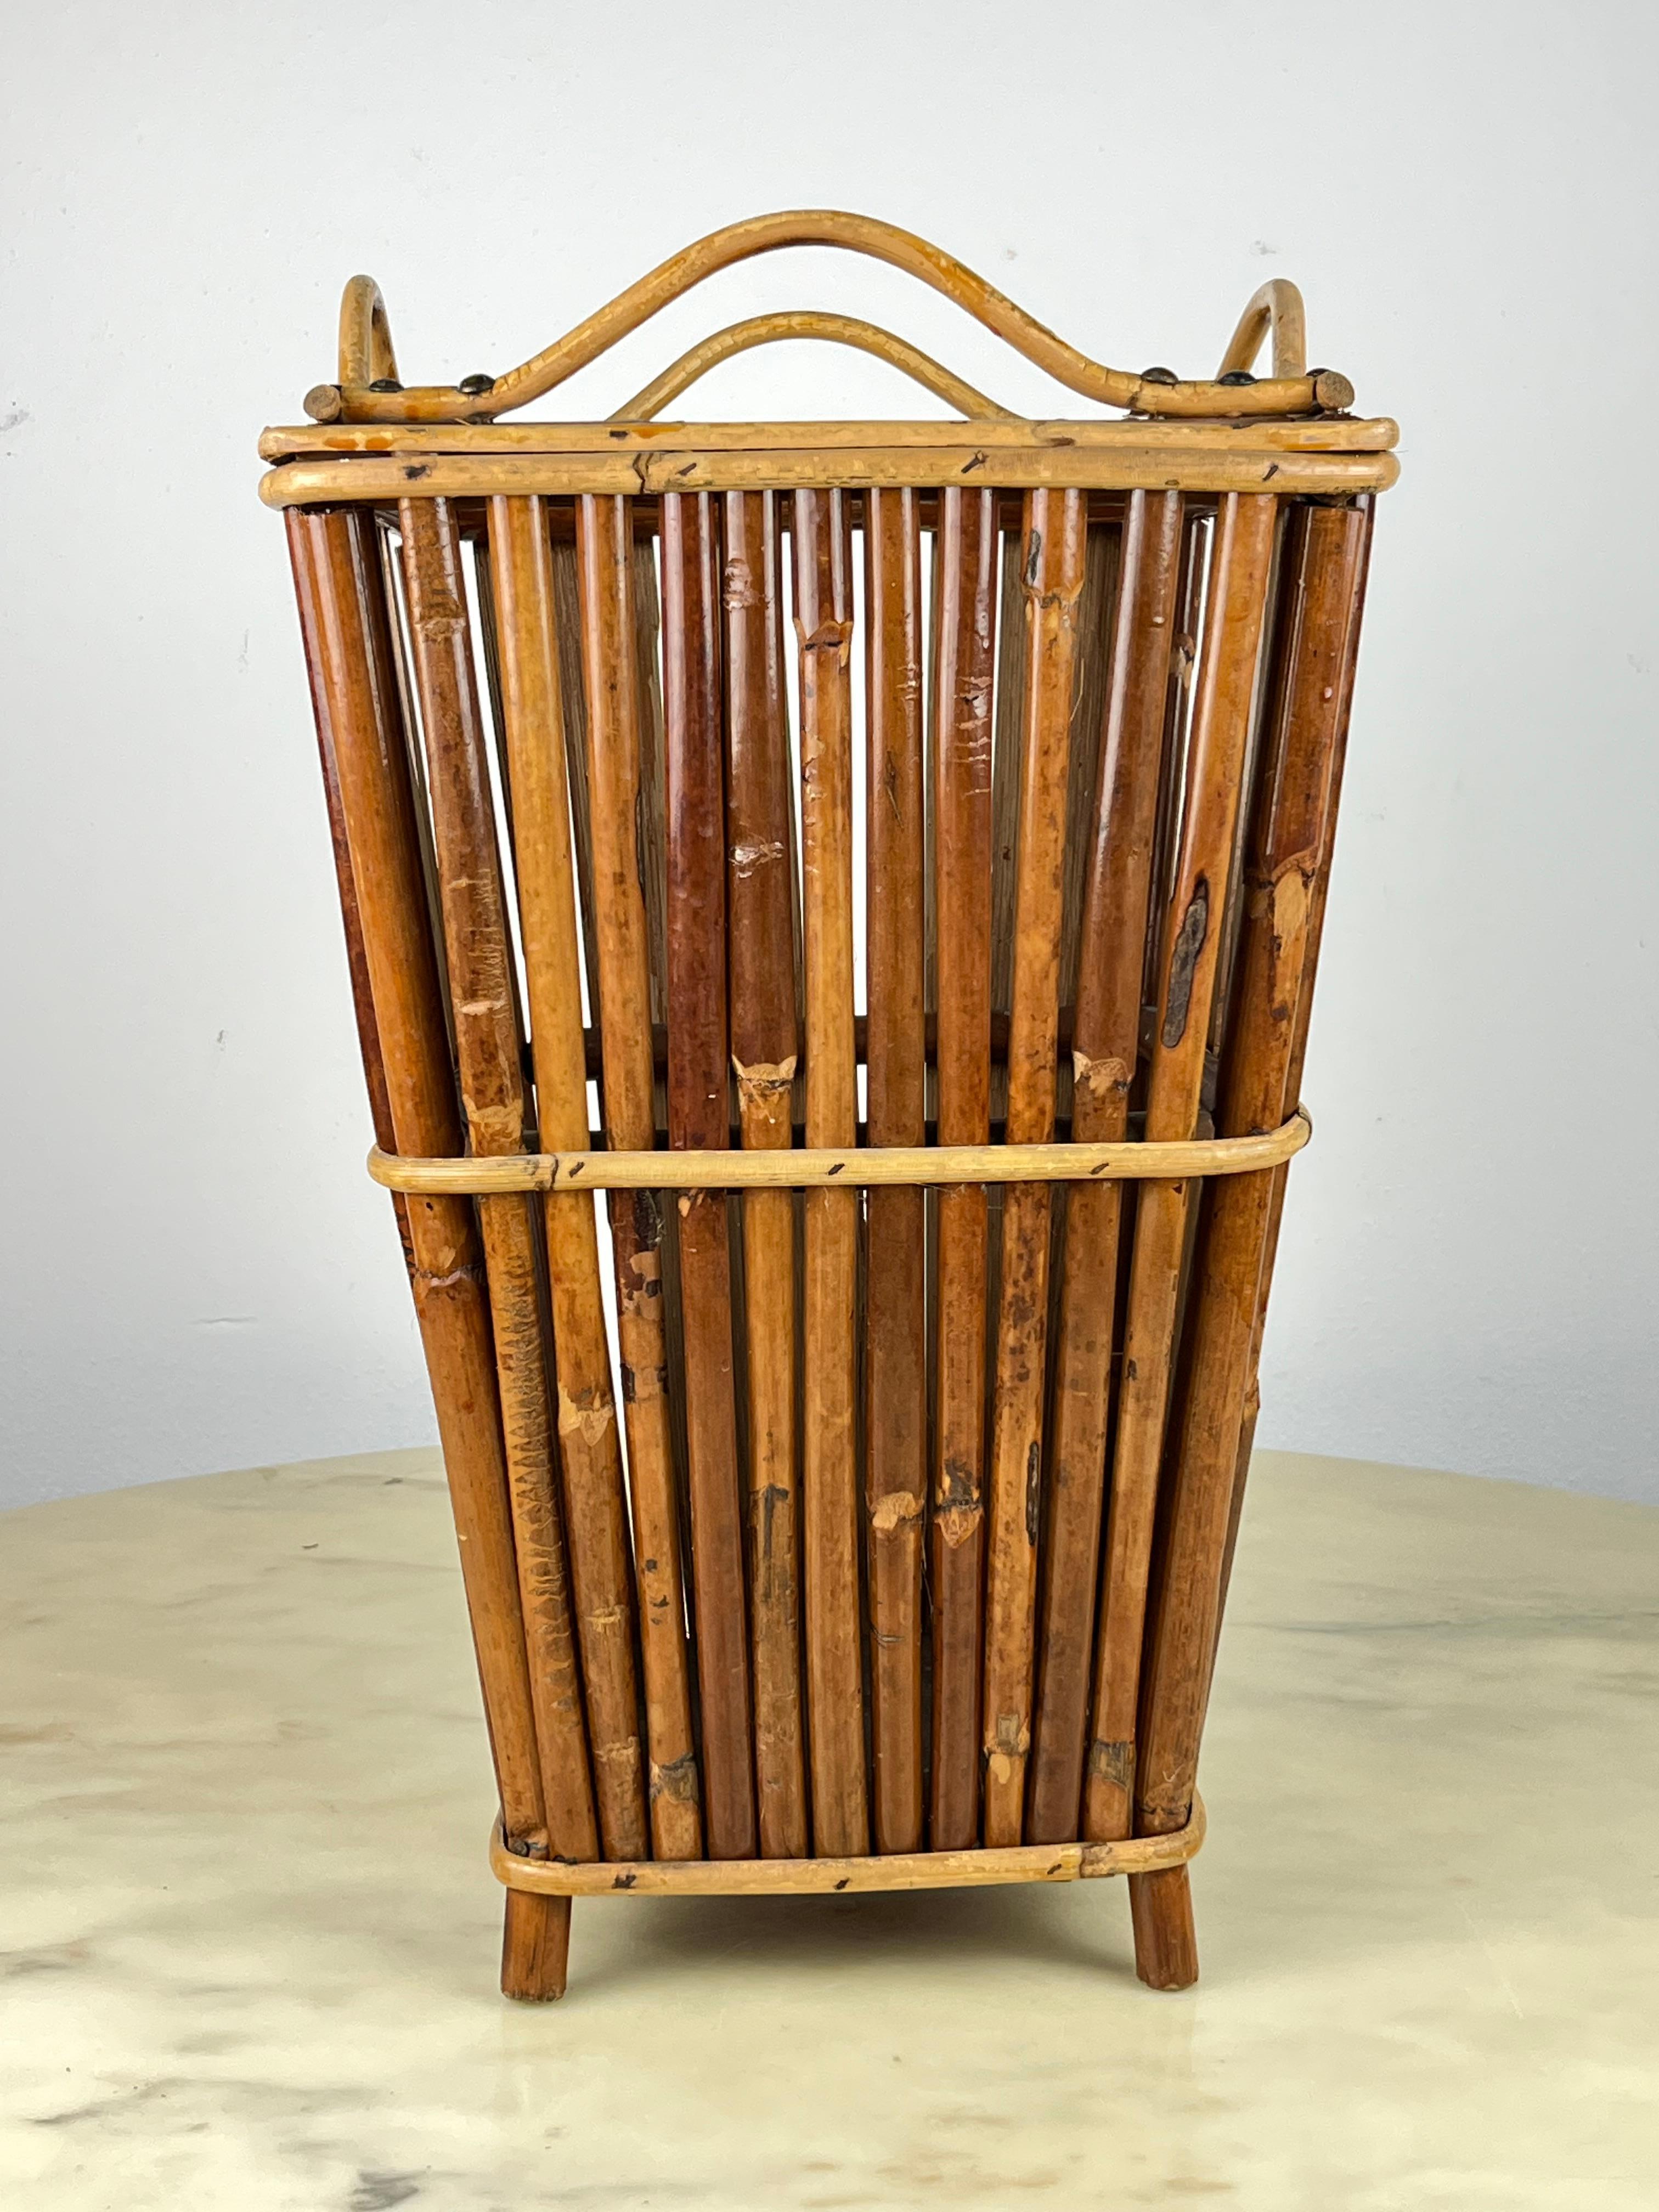 Bamboo umbrella stand, Italy, 1960s.
Family object, small signs of the time. Good conditions.